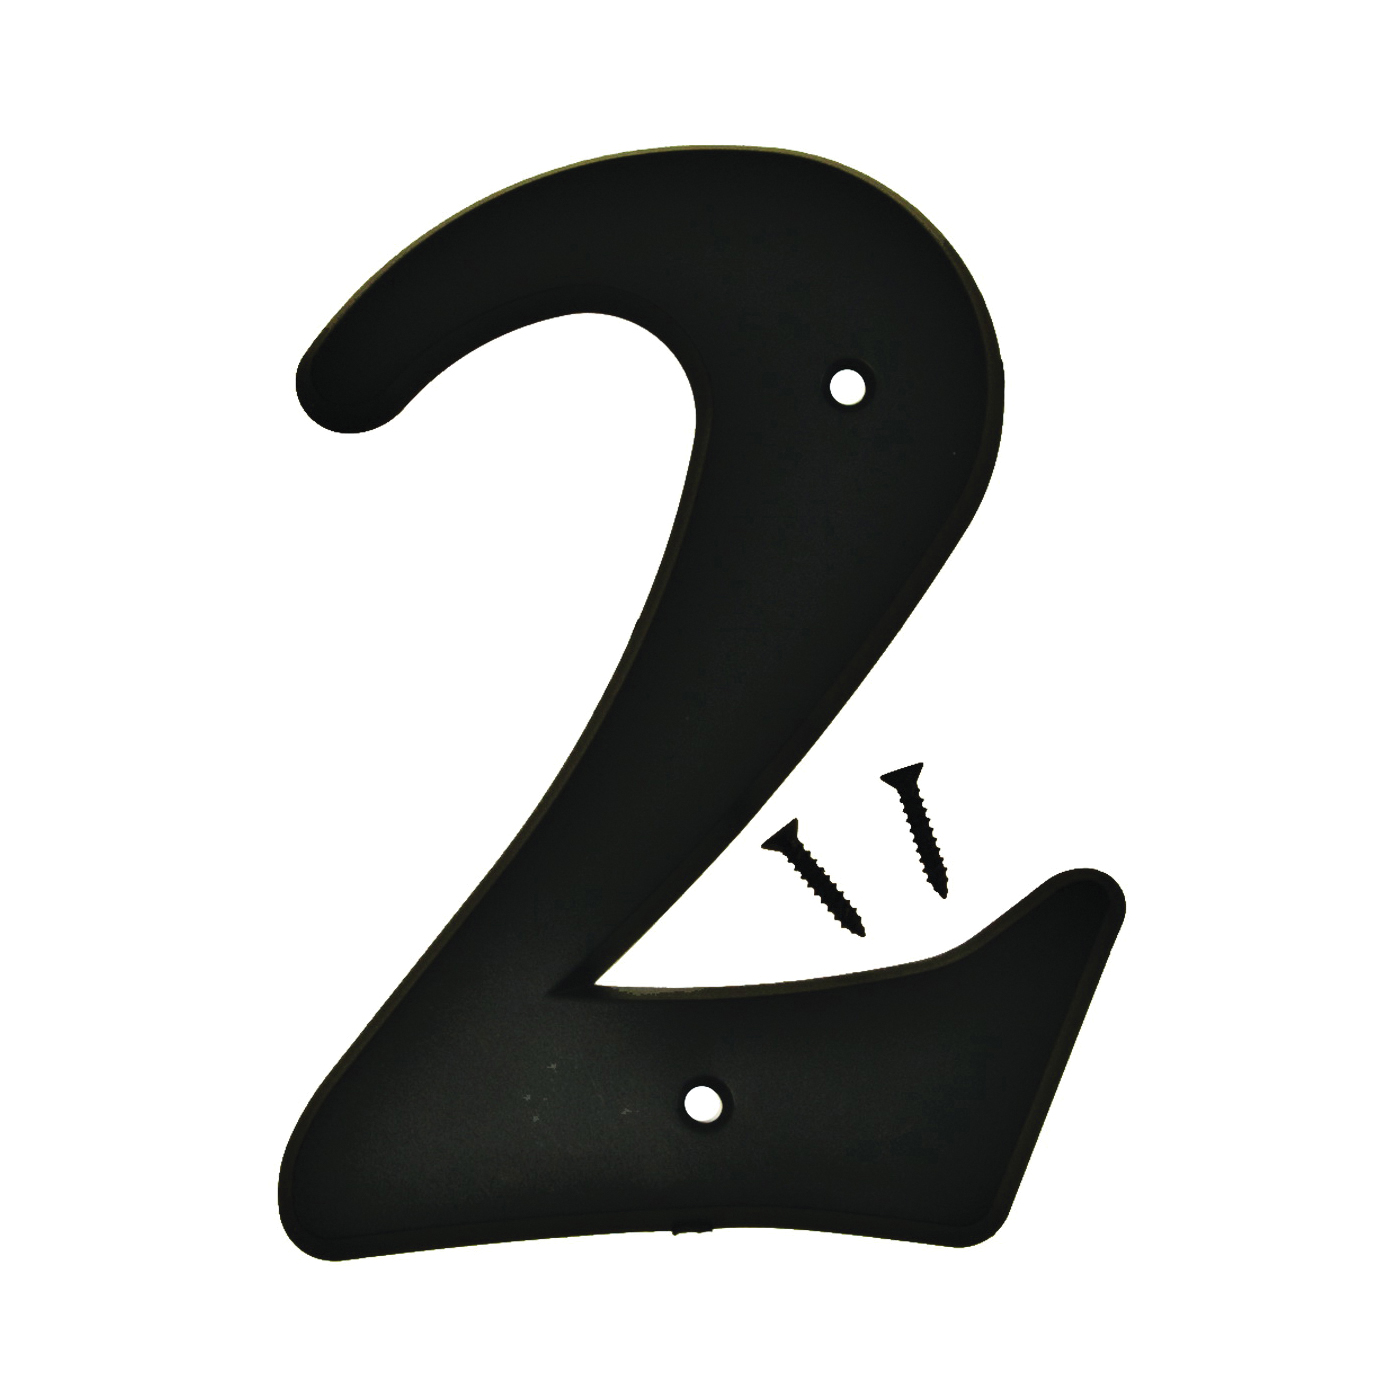 30200 Series 30202 House Number, Character: 2, 6 in H Character, Black Character, Plastic